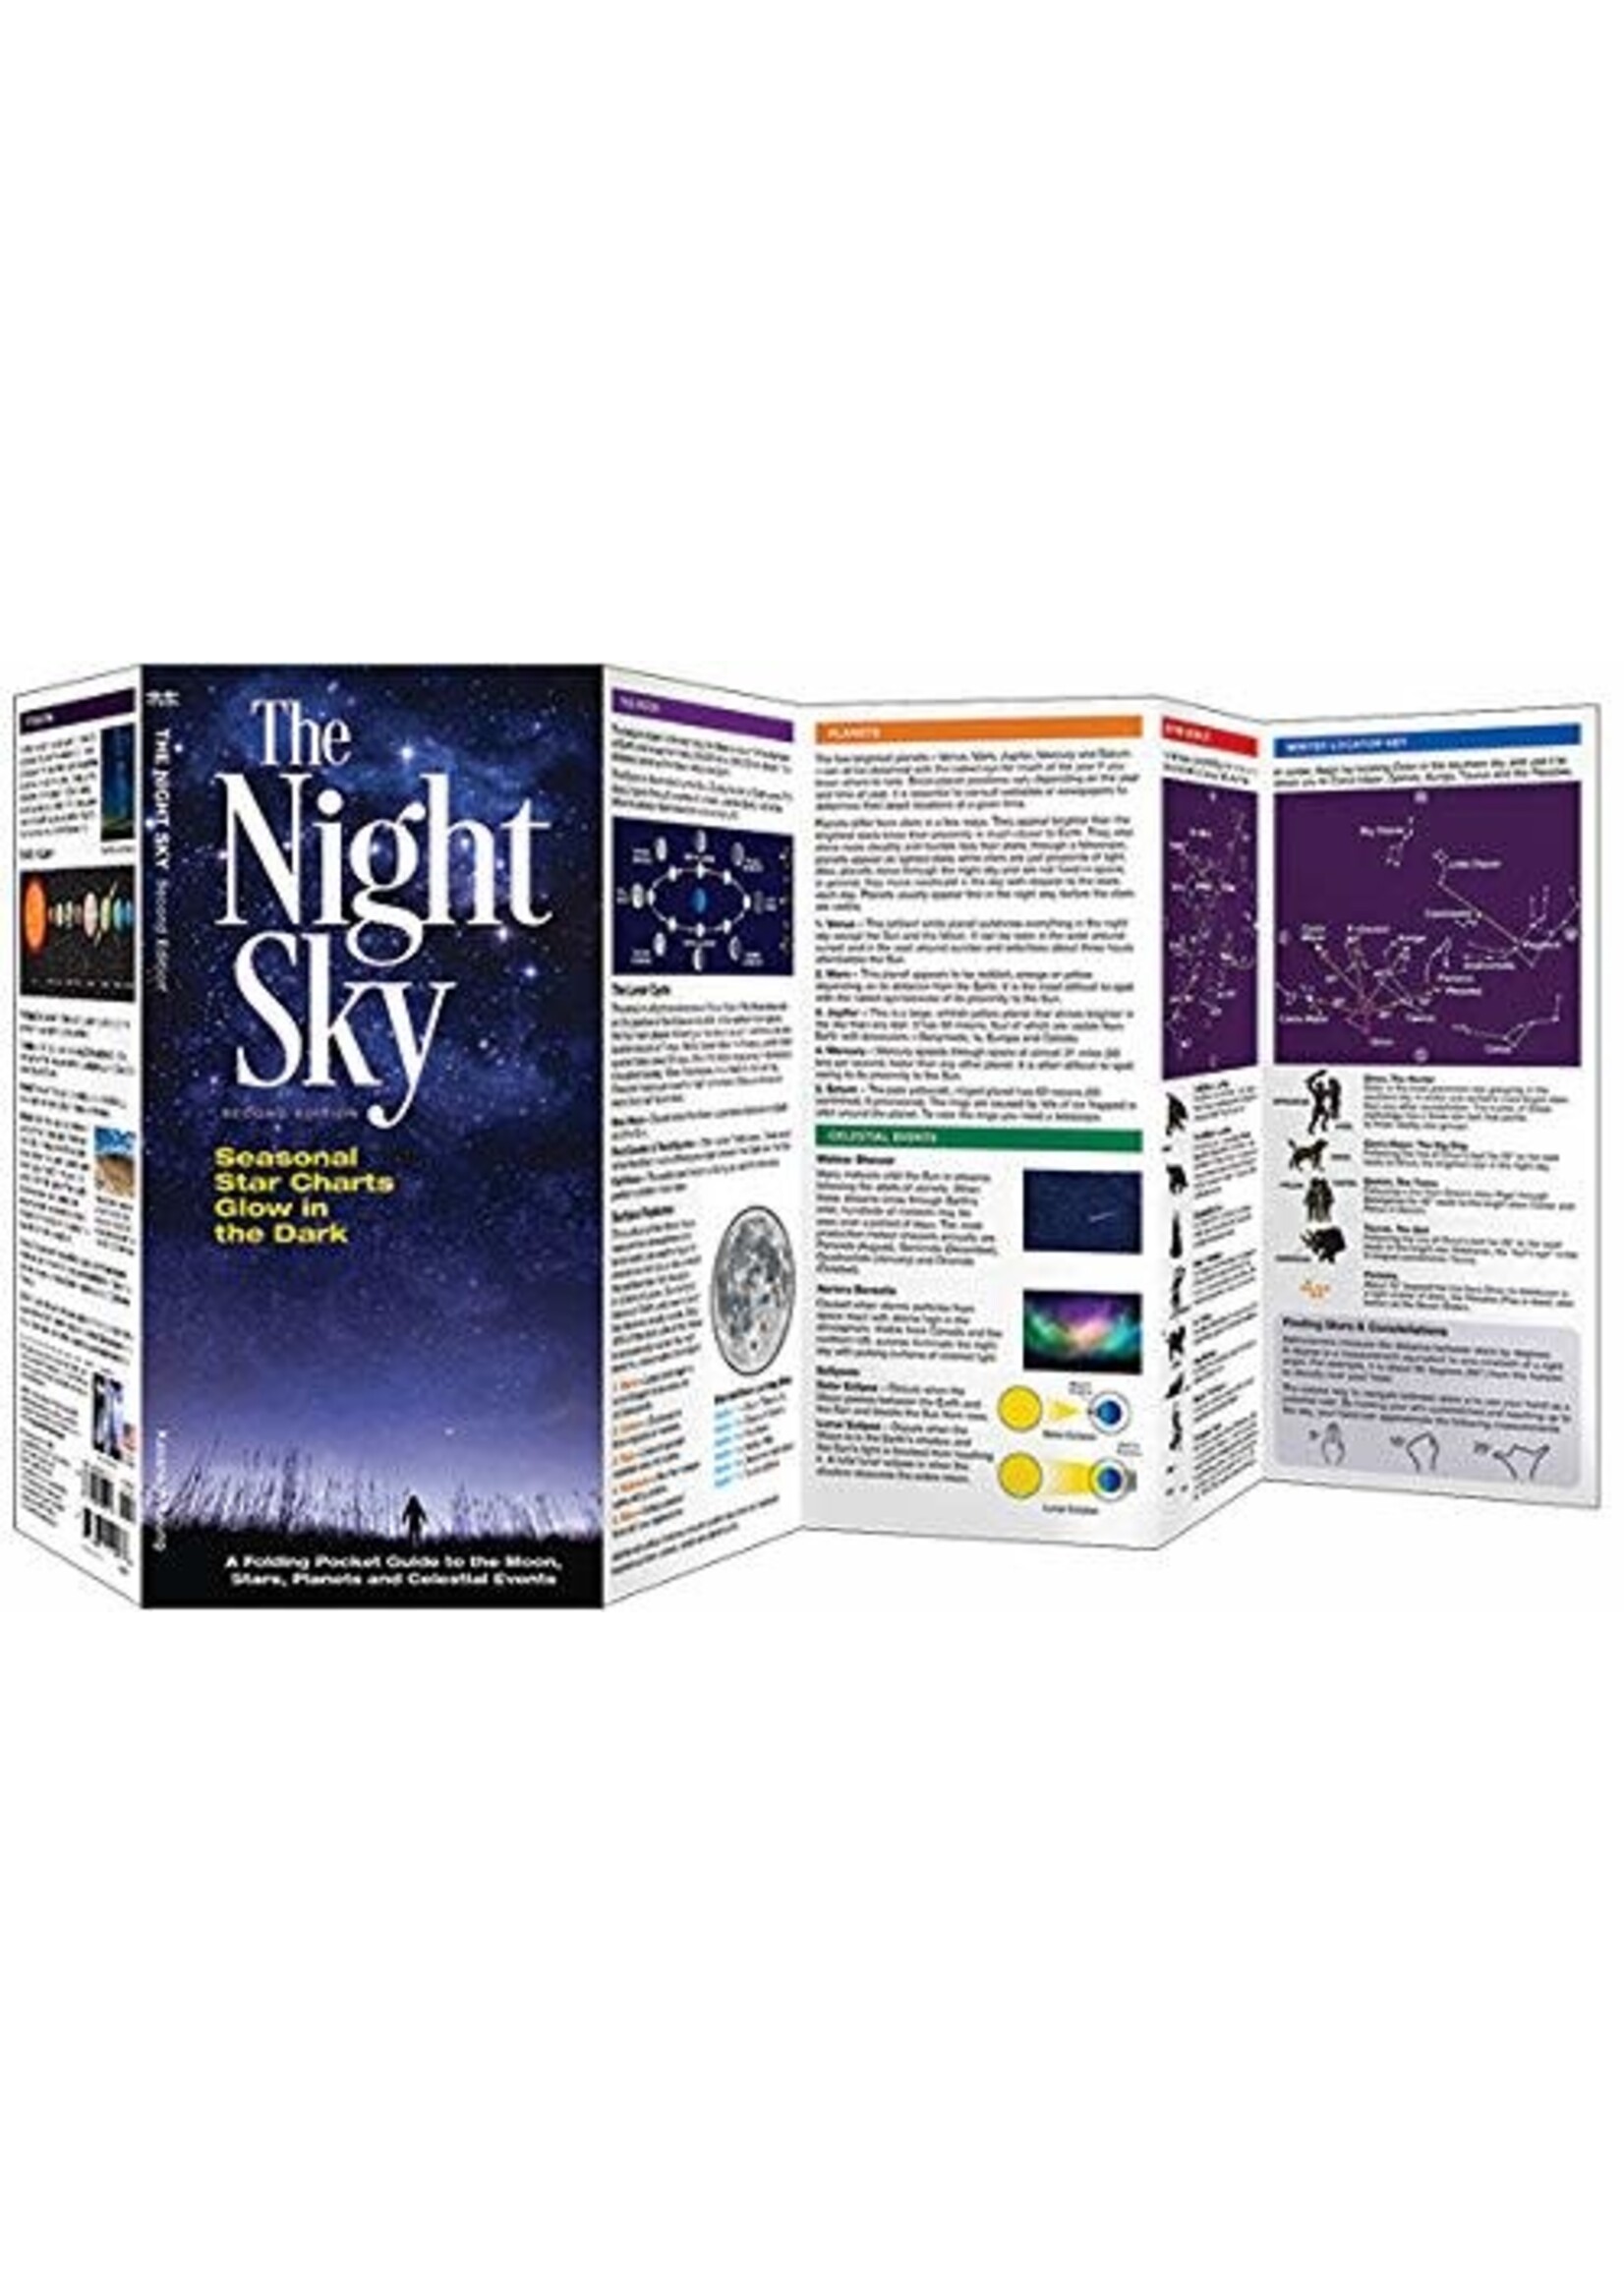 The Night Sky: A Folding Pocket Guide to the Moon, Stars, Planets, and Celestial Events 2nd Edition